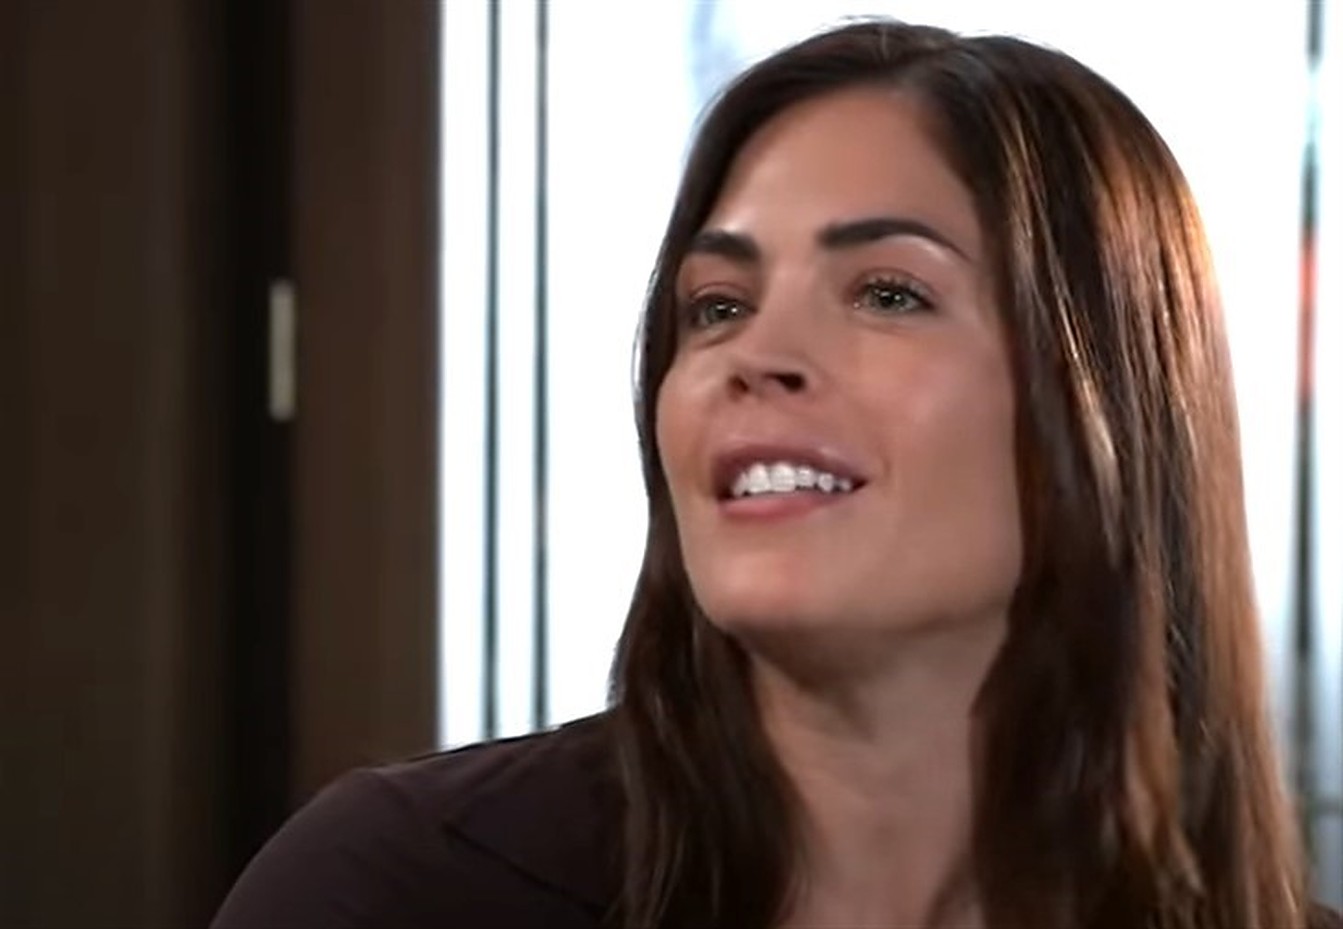 GH/Britt (Kelly Thiebaud) decides to live life to the fullest